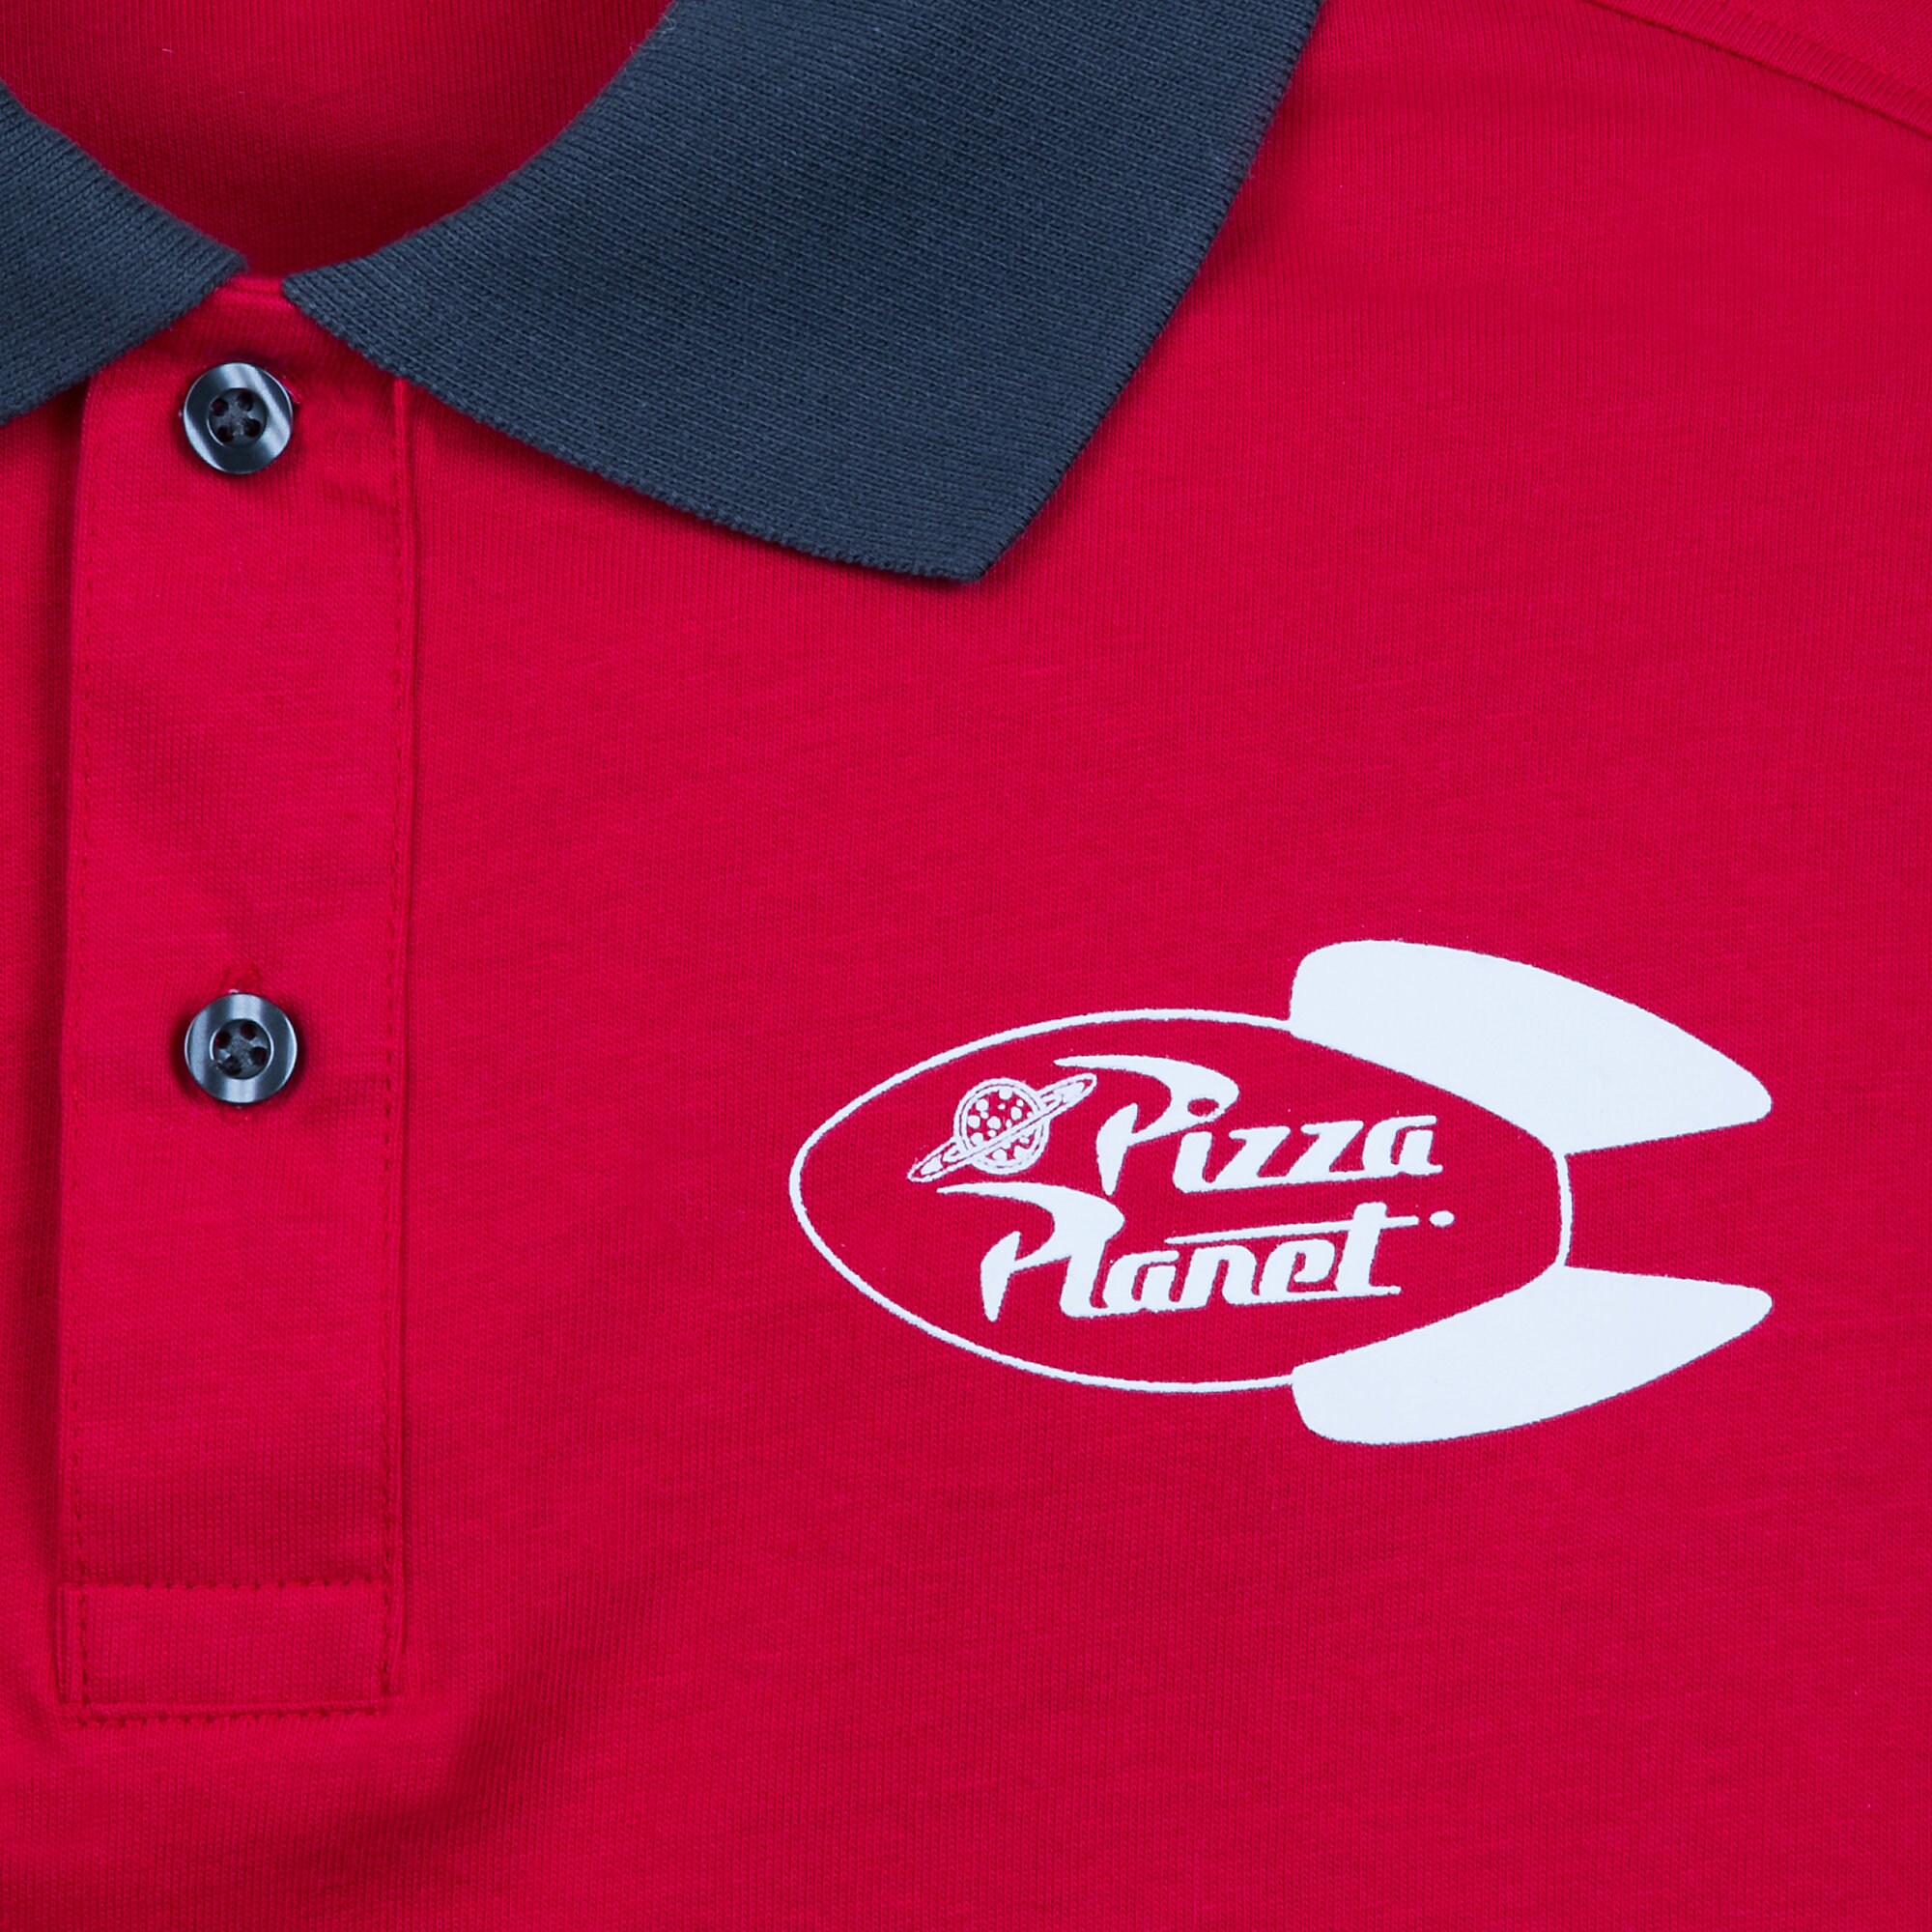 Pizza Planet Polo Shirt for Men - Toy Story